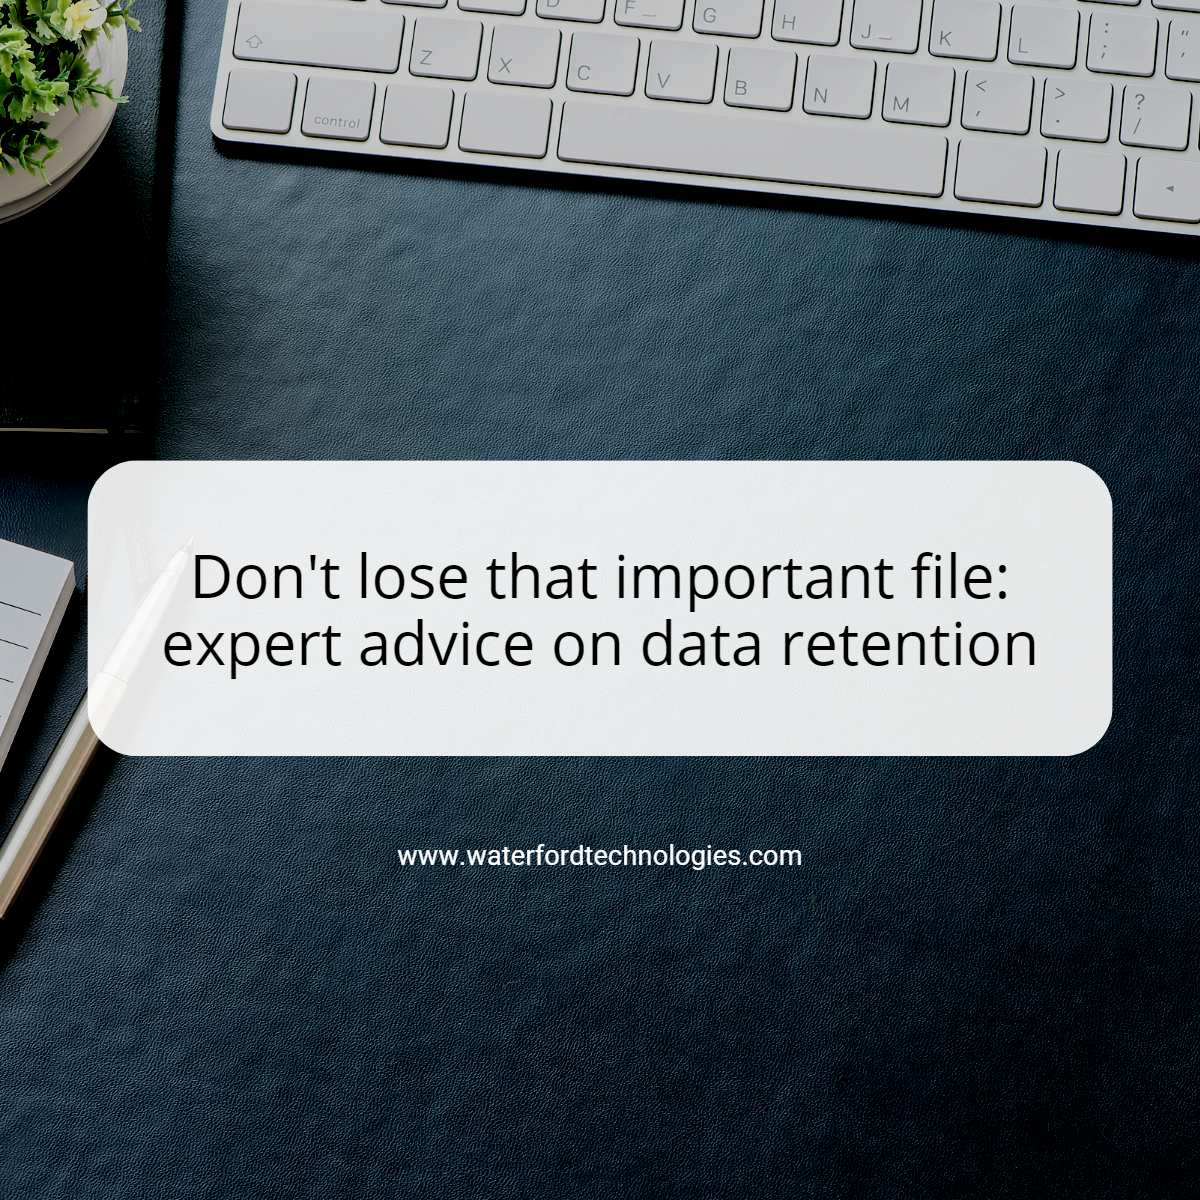 Data retention is a concern for many organizations - learn more in this week's blog post,  Don’t lose that important file: expert advice on data retention zurl.co/ZtOa

#dataretention #datamanagement #dataarchiving #dataprivacy #data